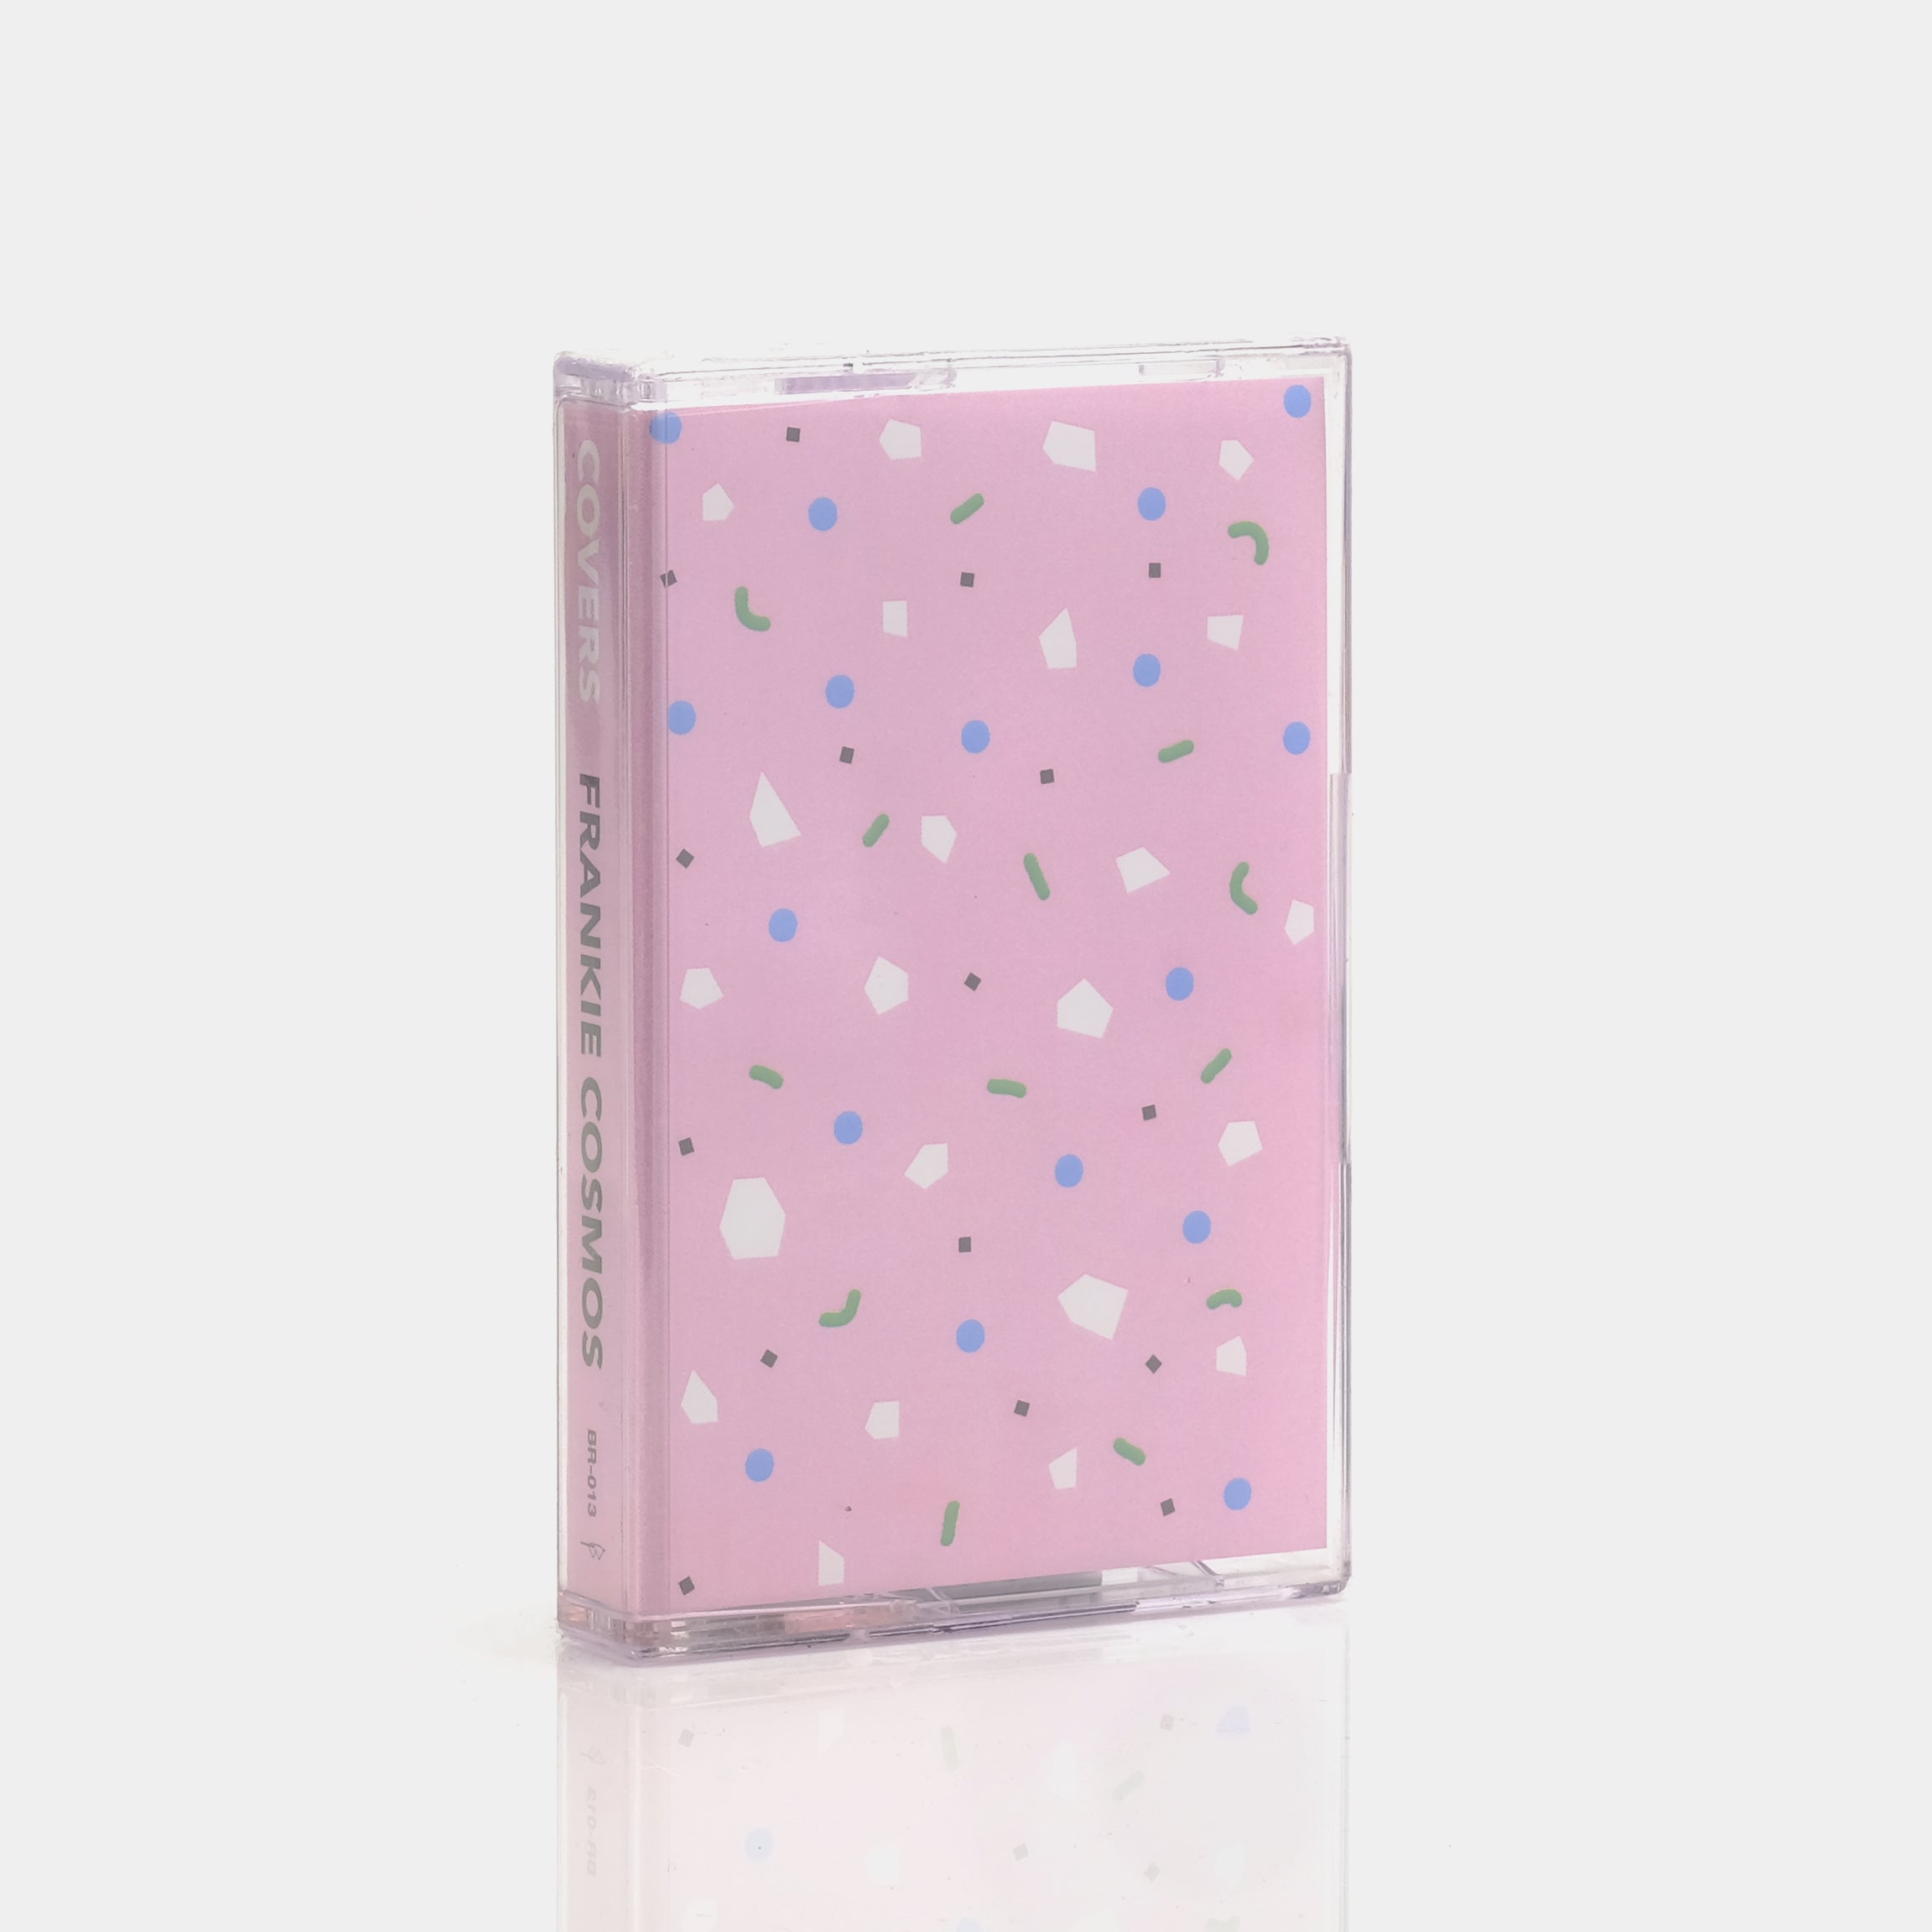 Frankie Cosmos - Covers Cassette Tape